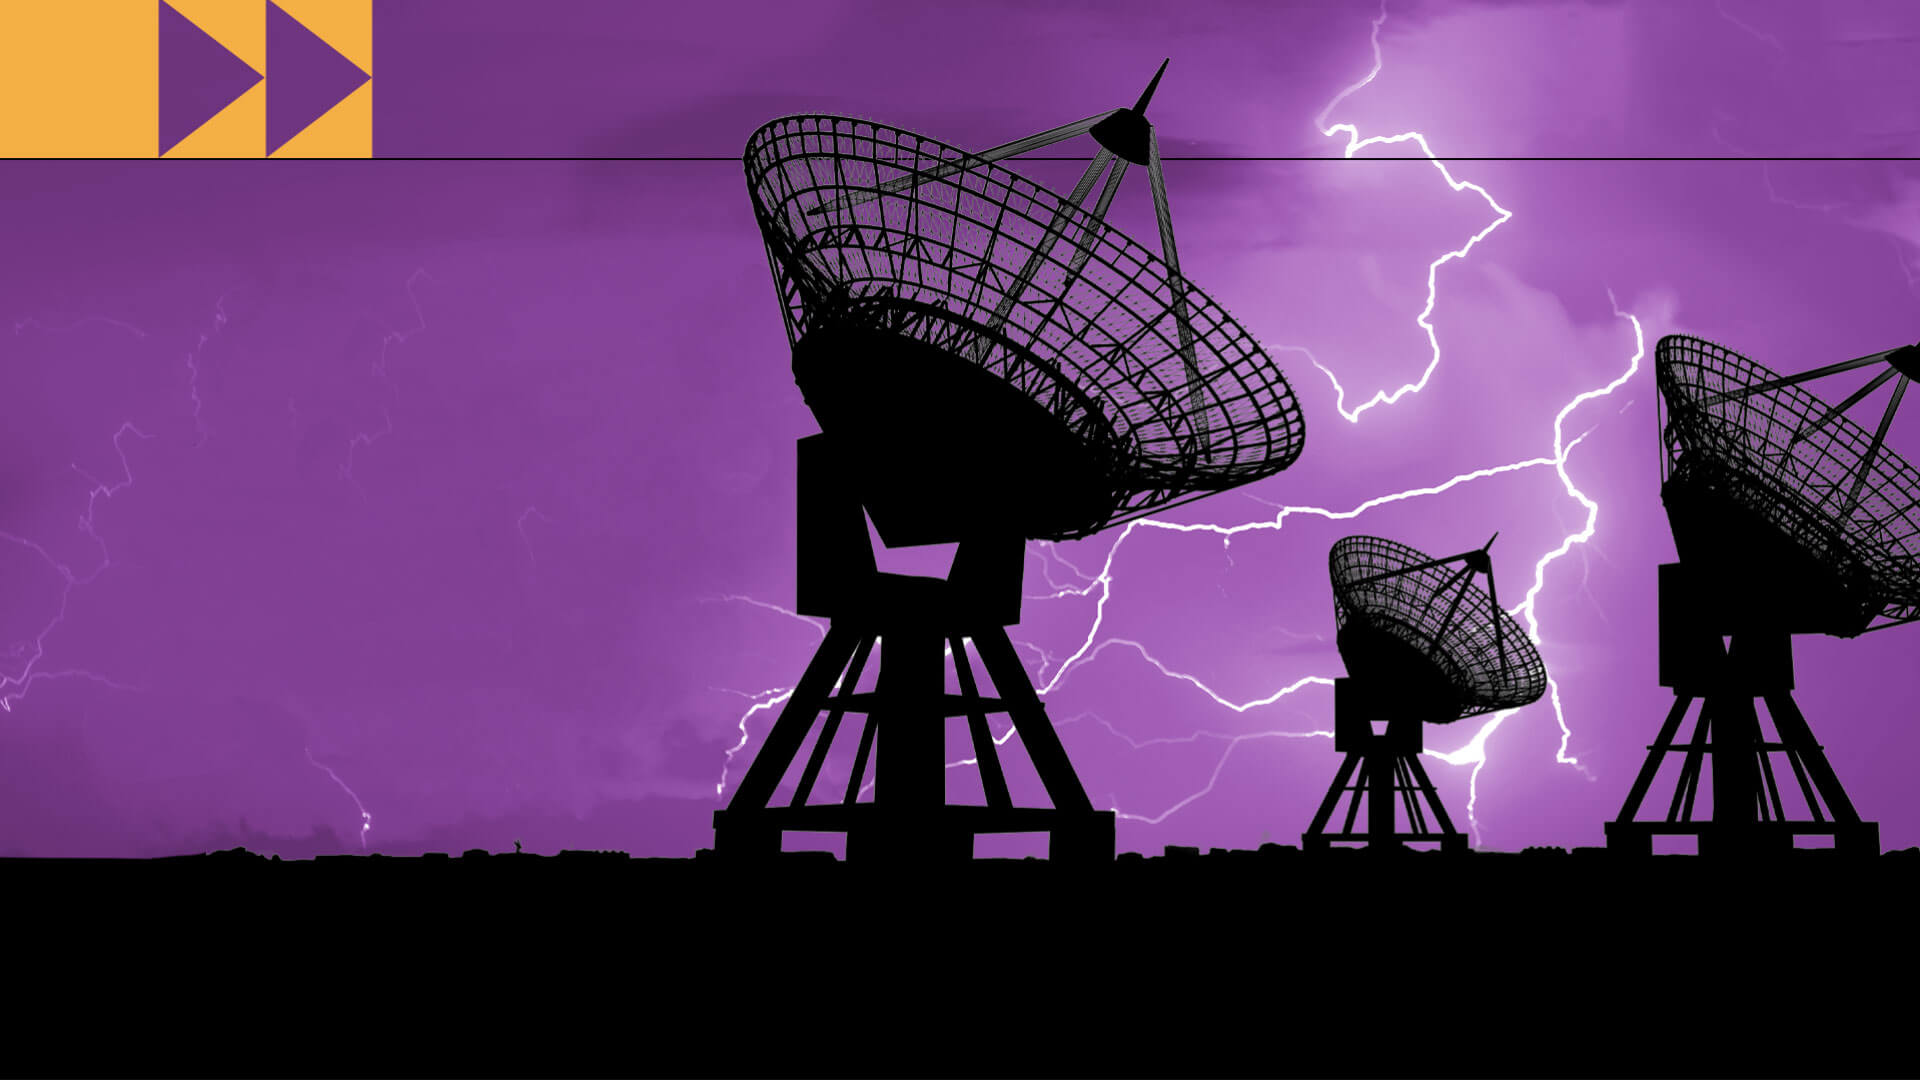 photocomposition: a storm on the background and an antenna to capture the weather information